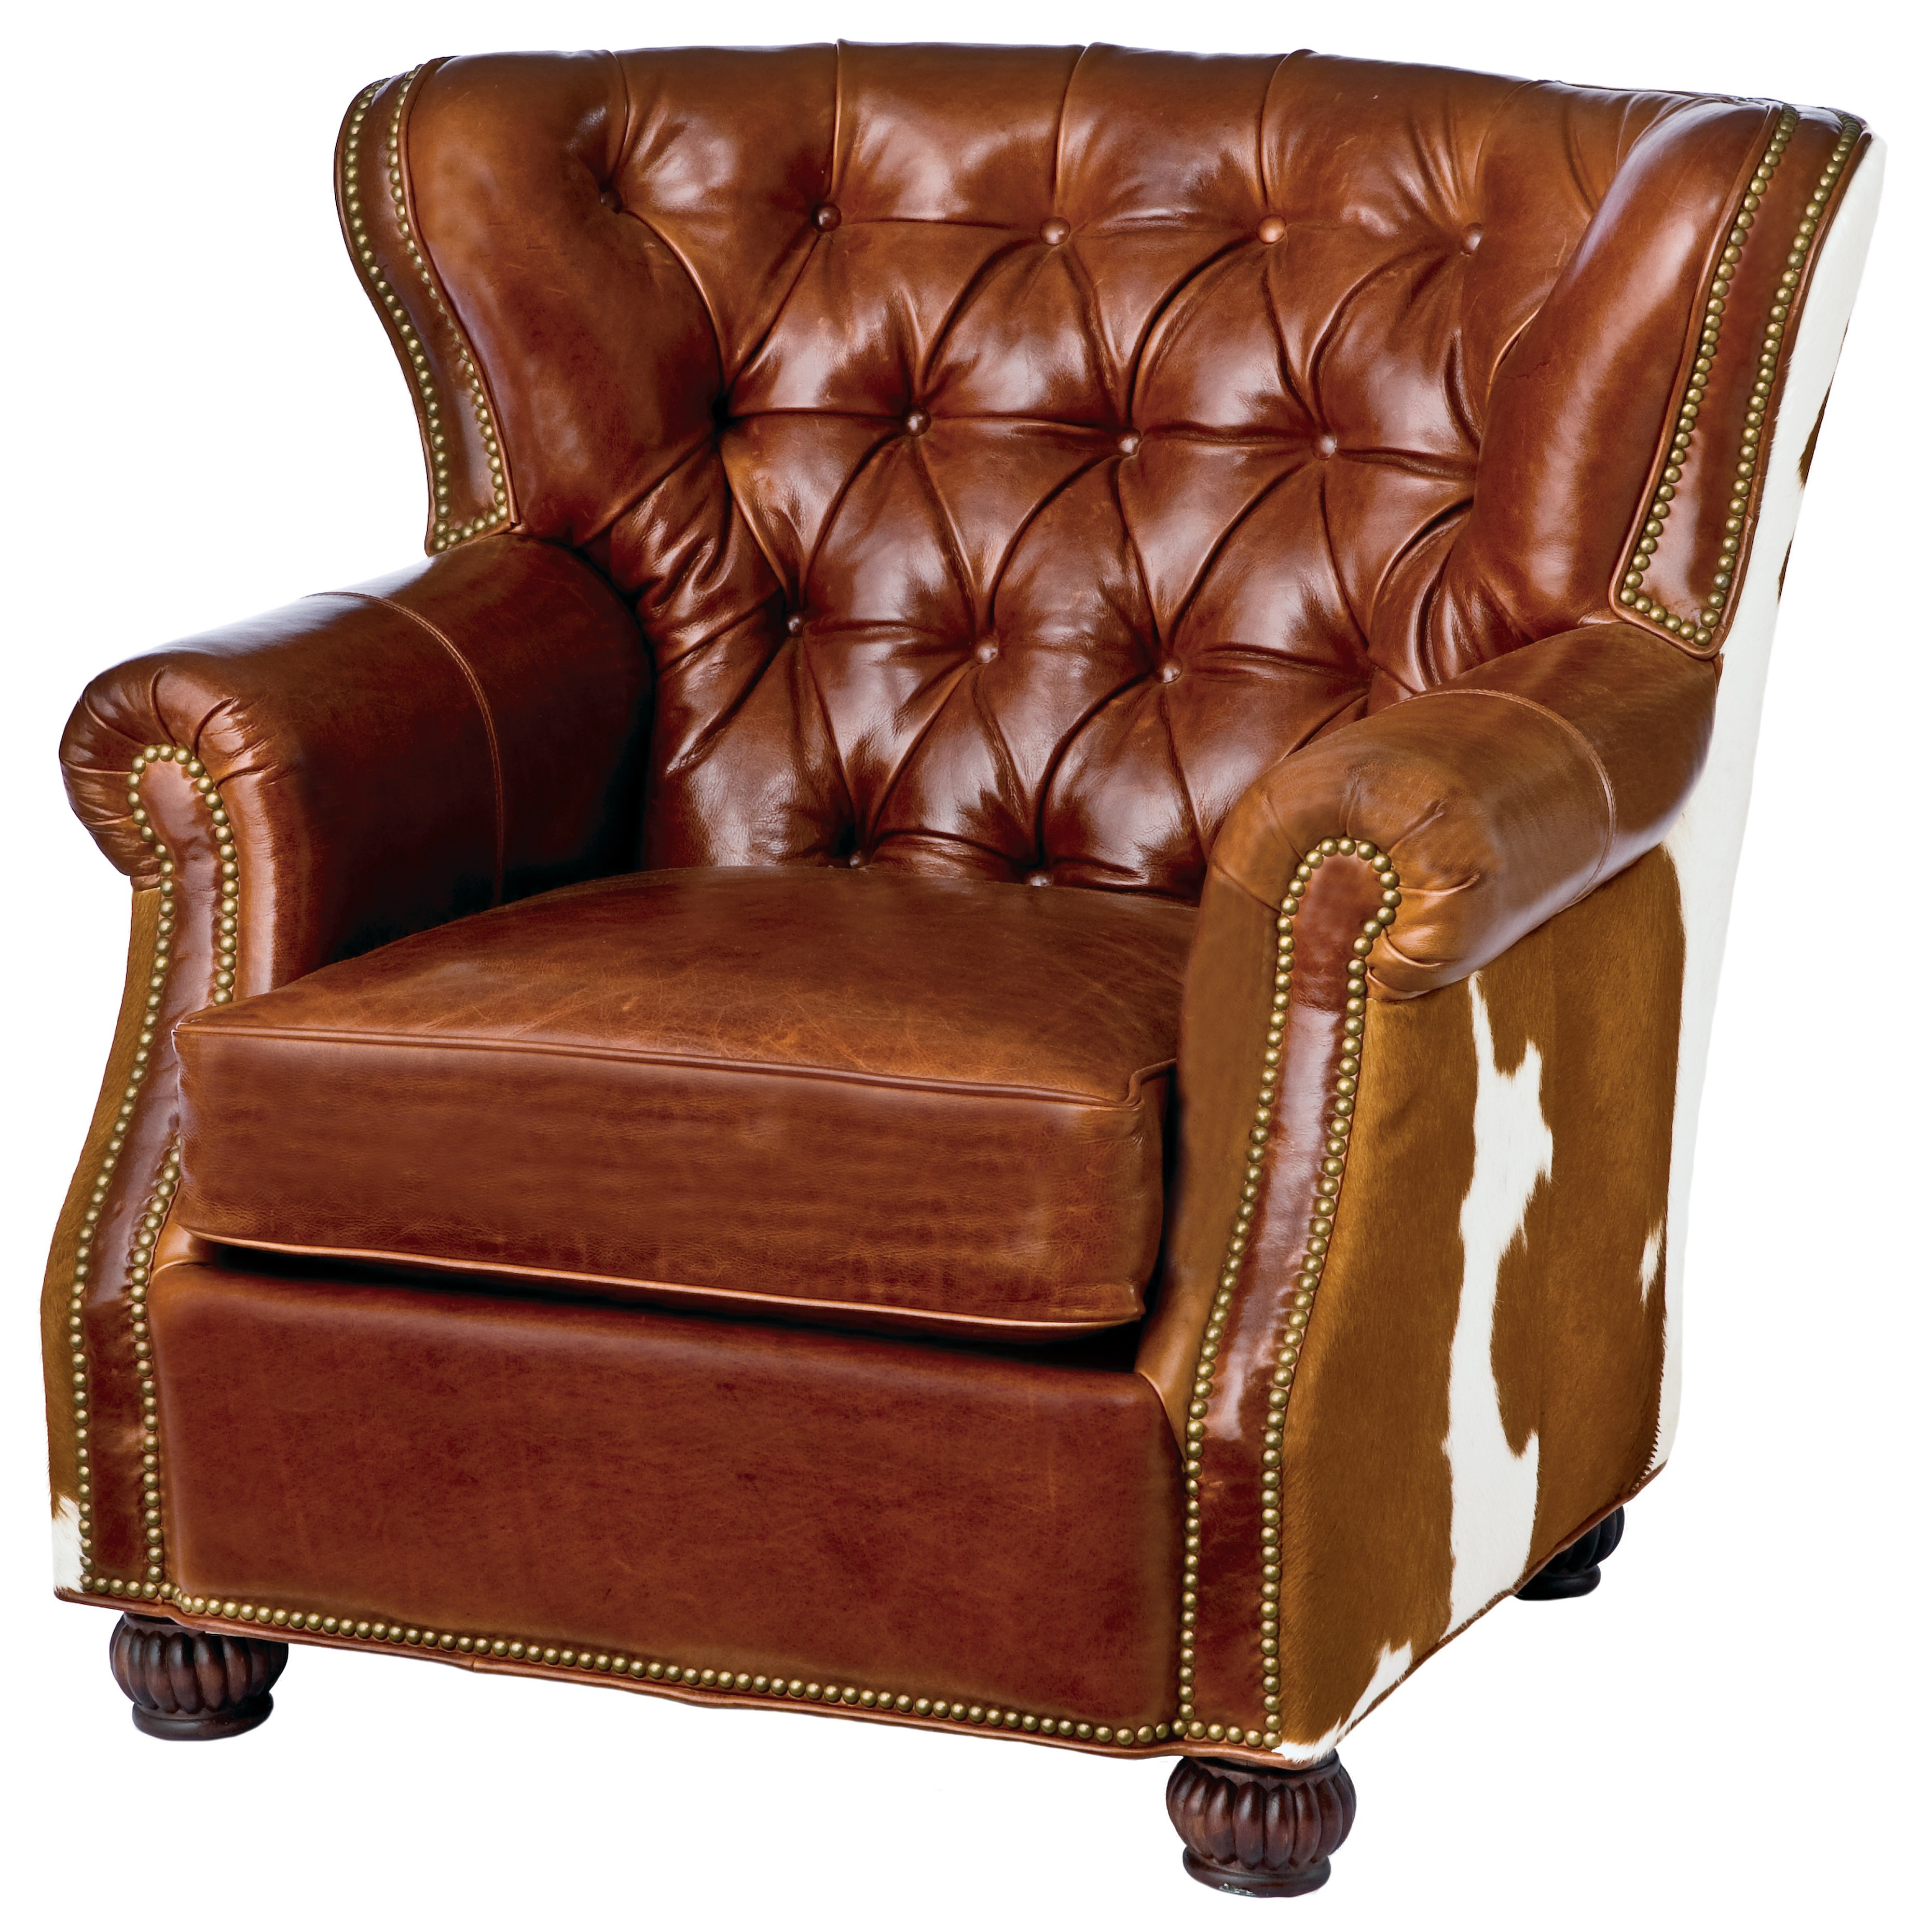 Unique Western Style Arm Chair, Western Leather Chairs